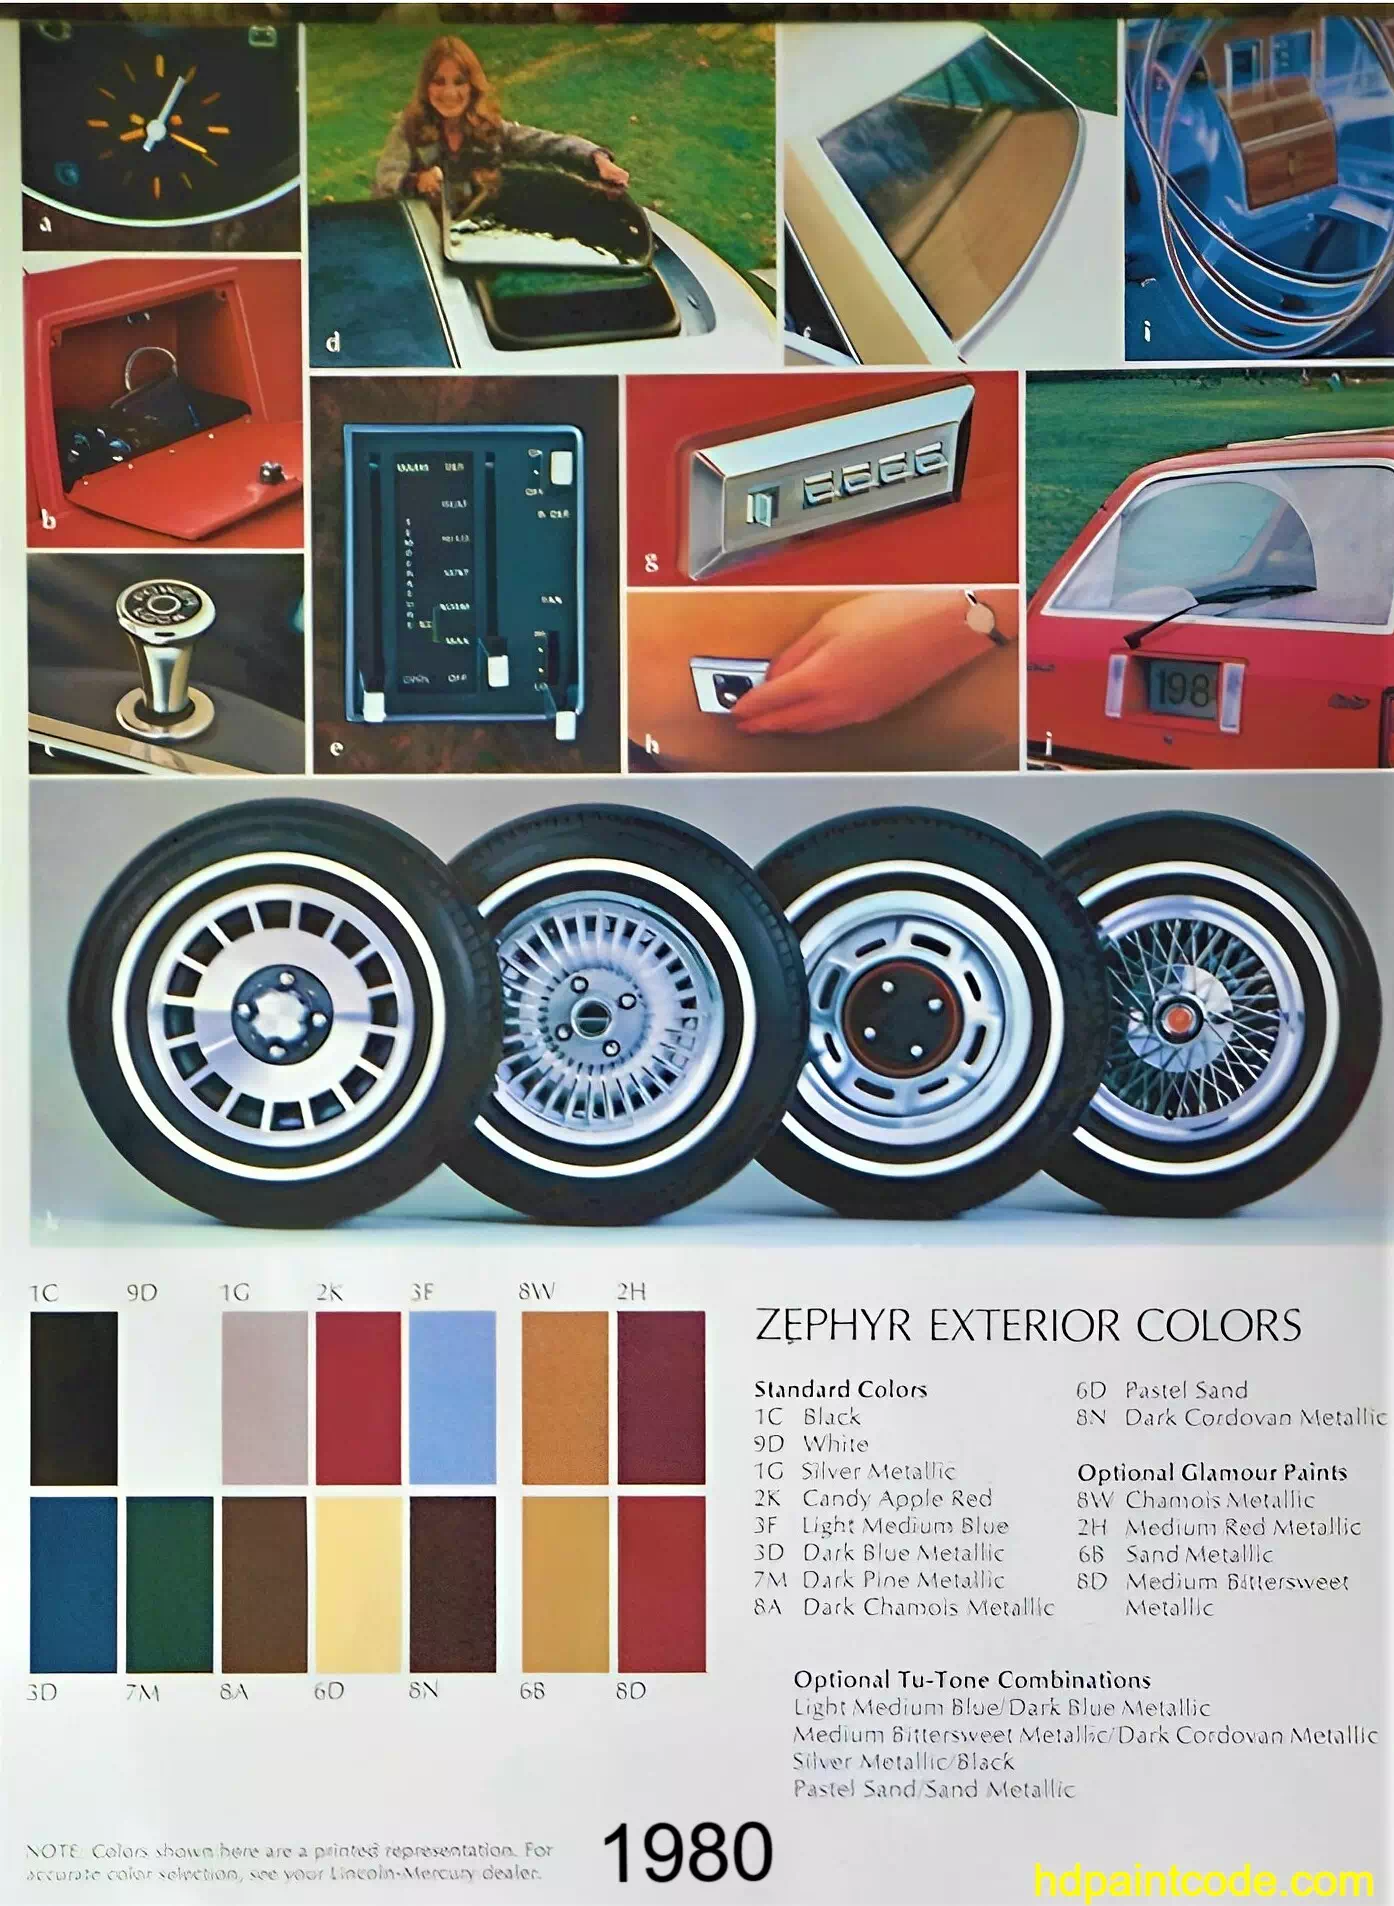 Paint codes, Exterior Colors, and Vehicle Rims used on the 1980 Mercury Zephyr automobiles